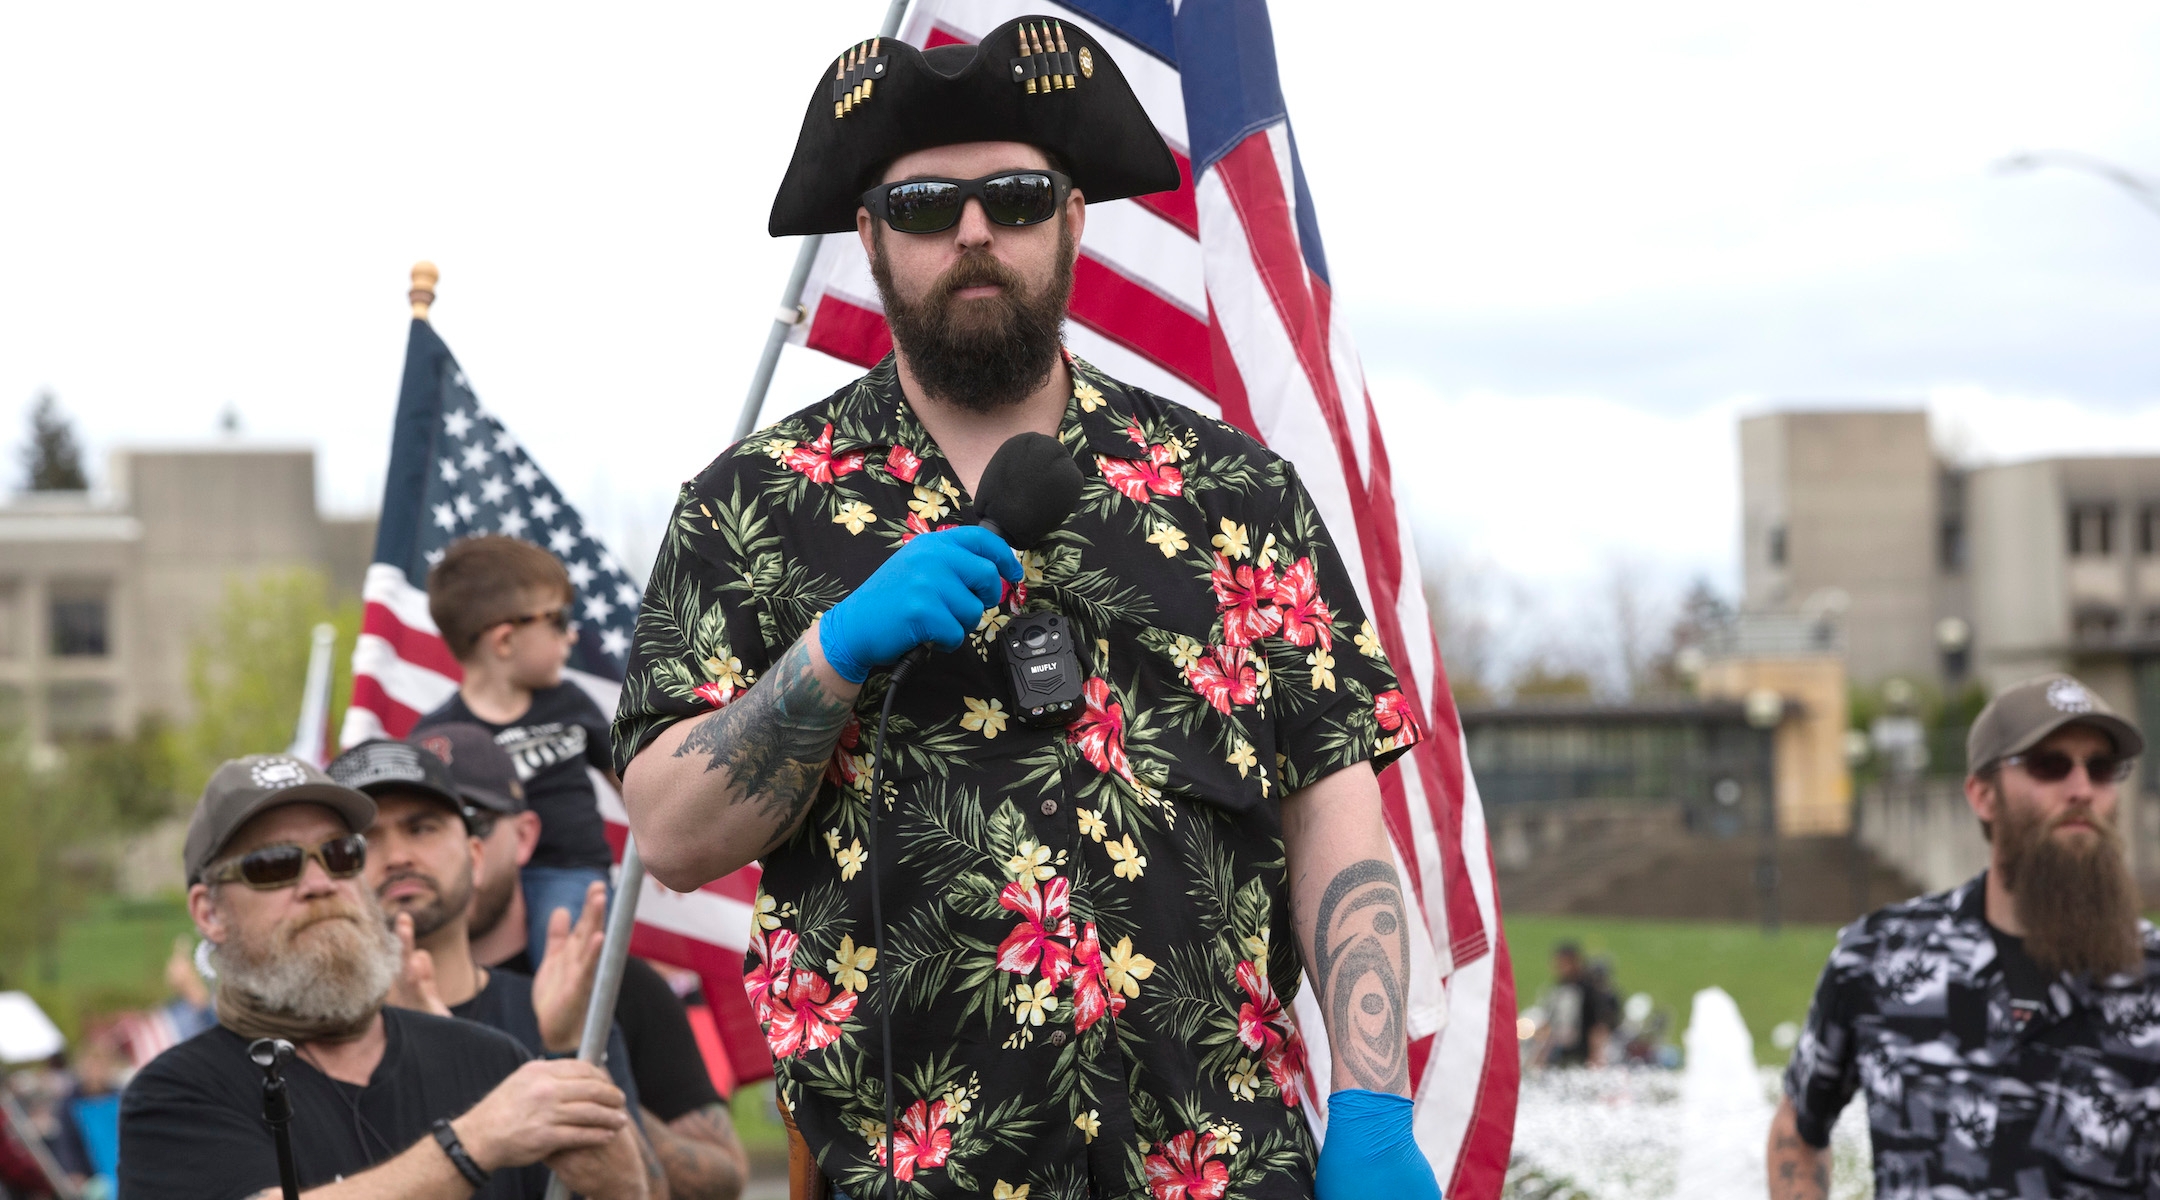 Matt Marshall of the right-wing group Washington State Three Percent (3%), and clad in the Boogaloo uniform of a Hawaiian shirt, speaks at a 'Hazardous Liberty! Defend the Constitution!' rally to protest the stay-at-home order, at the Capitol building in Olympia, Washington on April 19, 2020. (Karen Ducey/Getty Images)